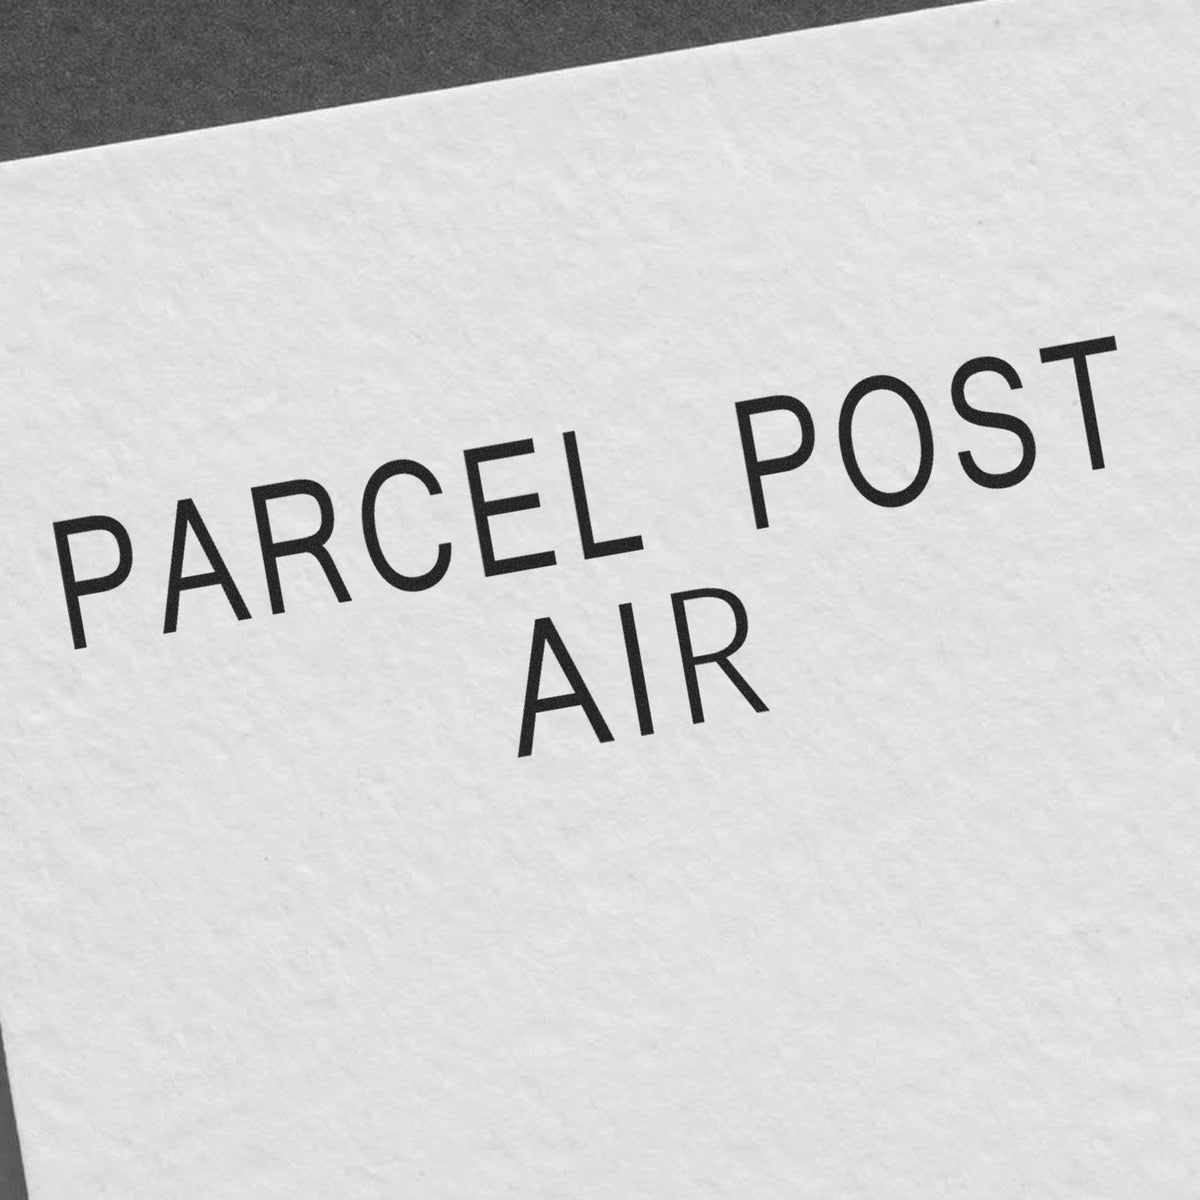 Parcel Post Air Rubber Stamp Lifestyle Photo